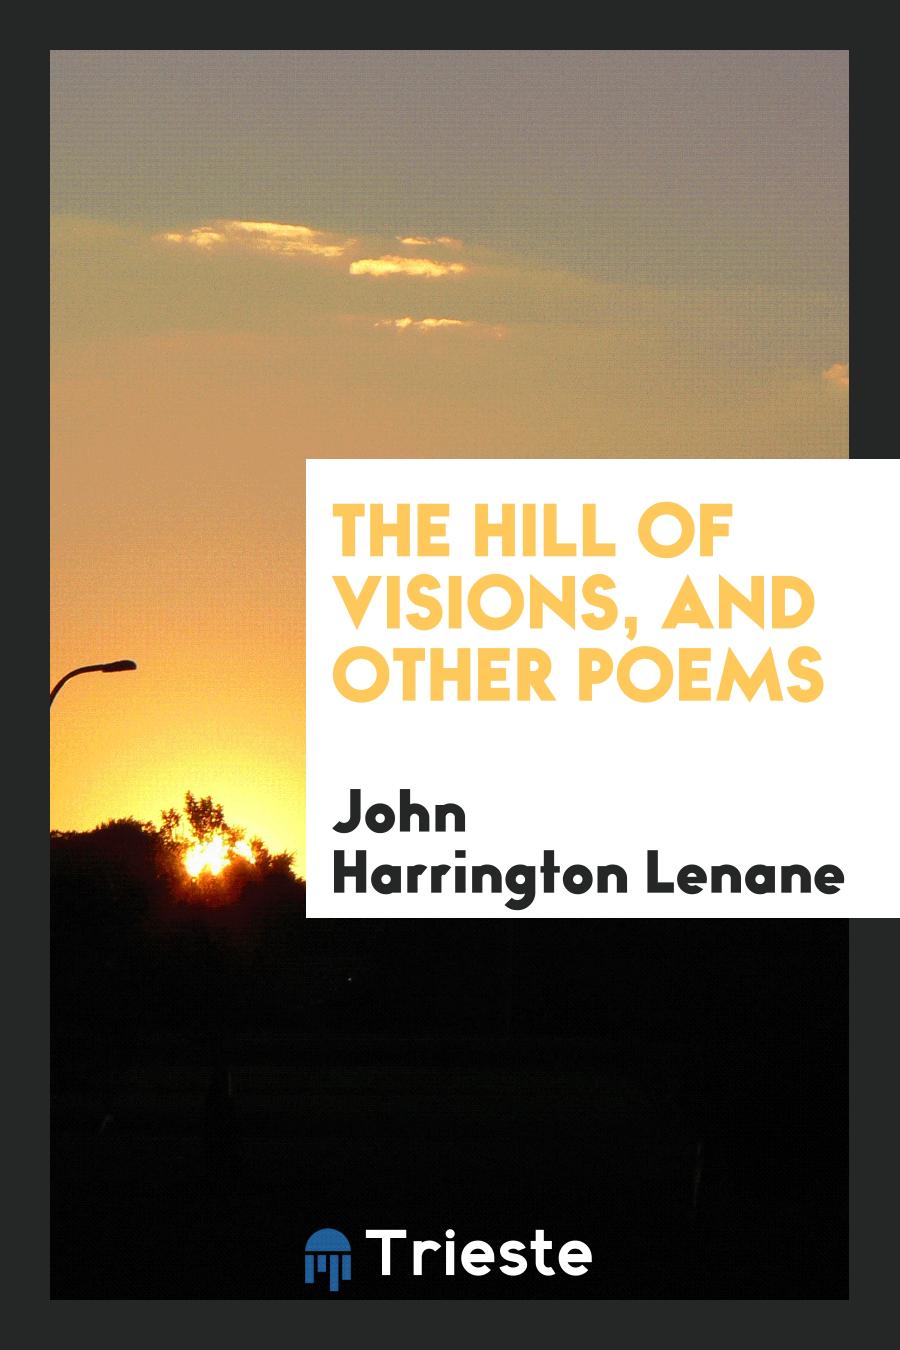 The Hill of Visions, and Other Poems